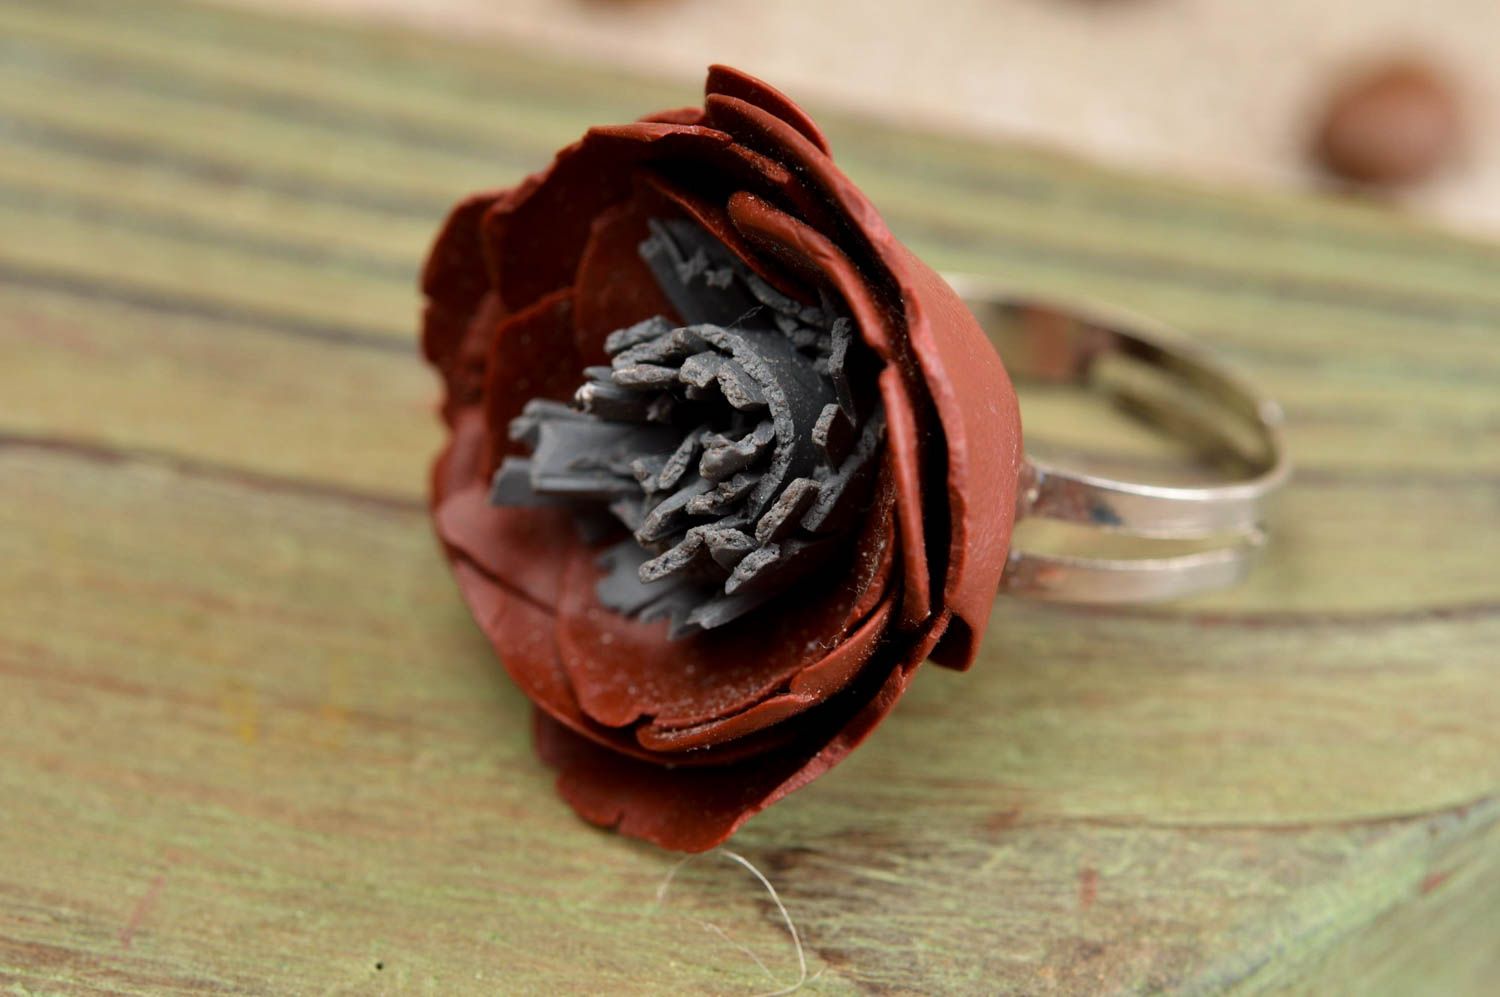 Unusual handmade flower ring cool jewelry designs polymer clay ideas small gifts photo 1